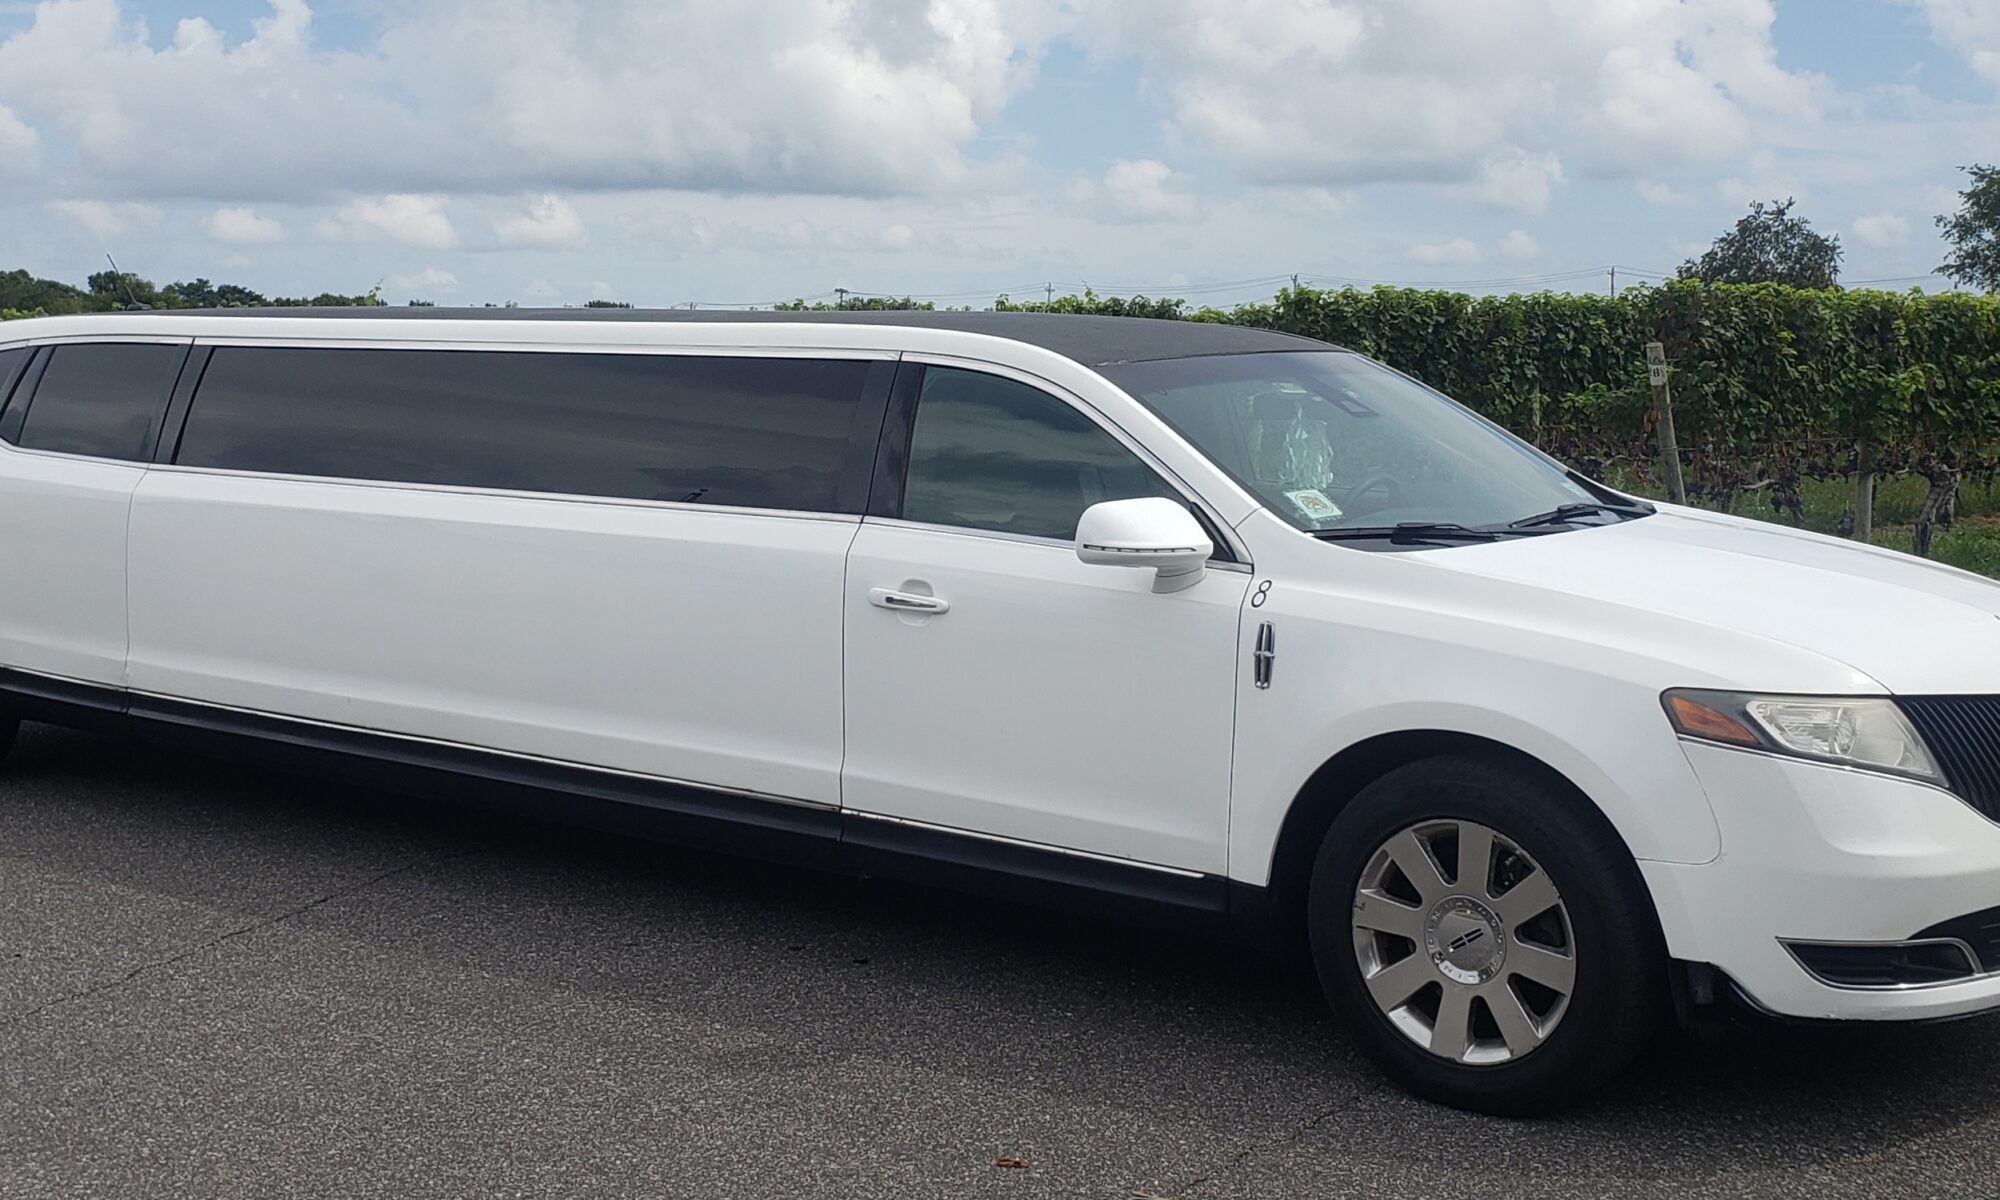 Luxury Limo's, Sprinter Vans & Party Buses - Long Island Vineyard Tours